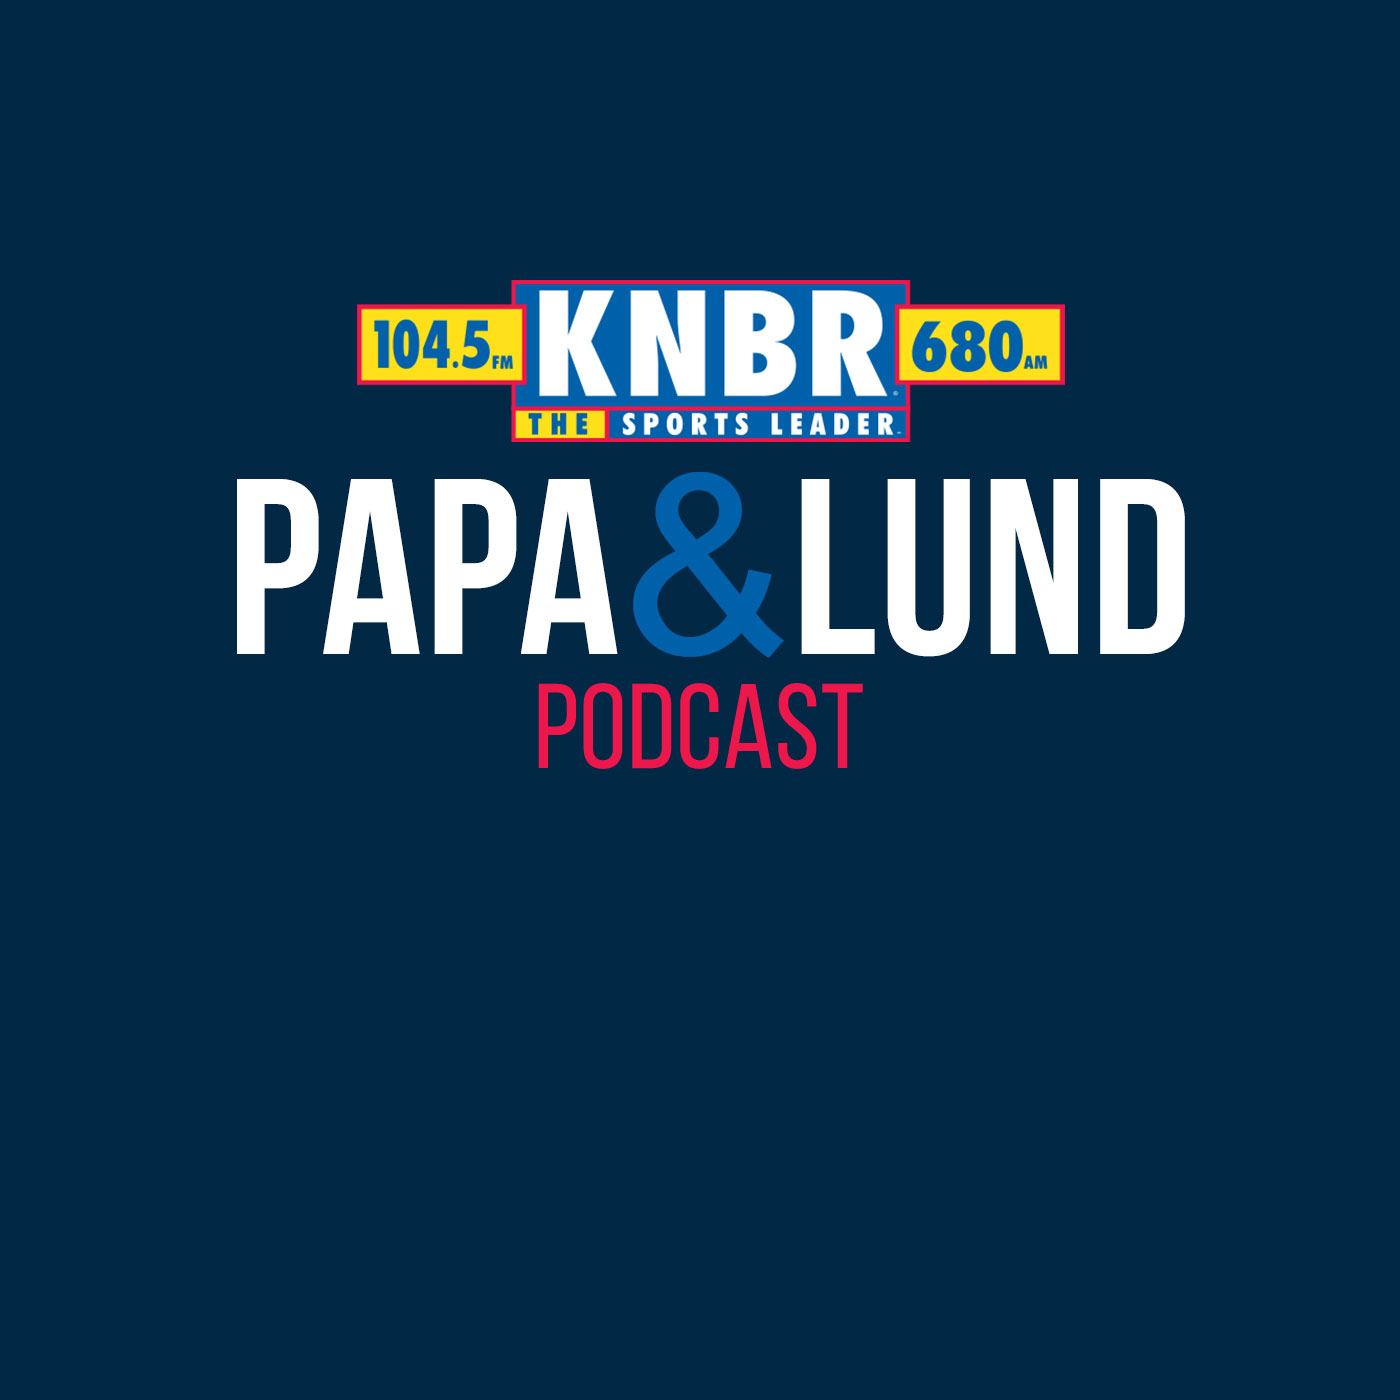 6-9 Chris Haynes joins Papa & Lund to discuss how Jordan Poole needs to step up offensively and how the Warriors need to collectively get better on defense in order to win the Finals